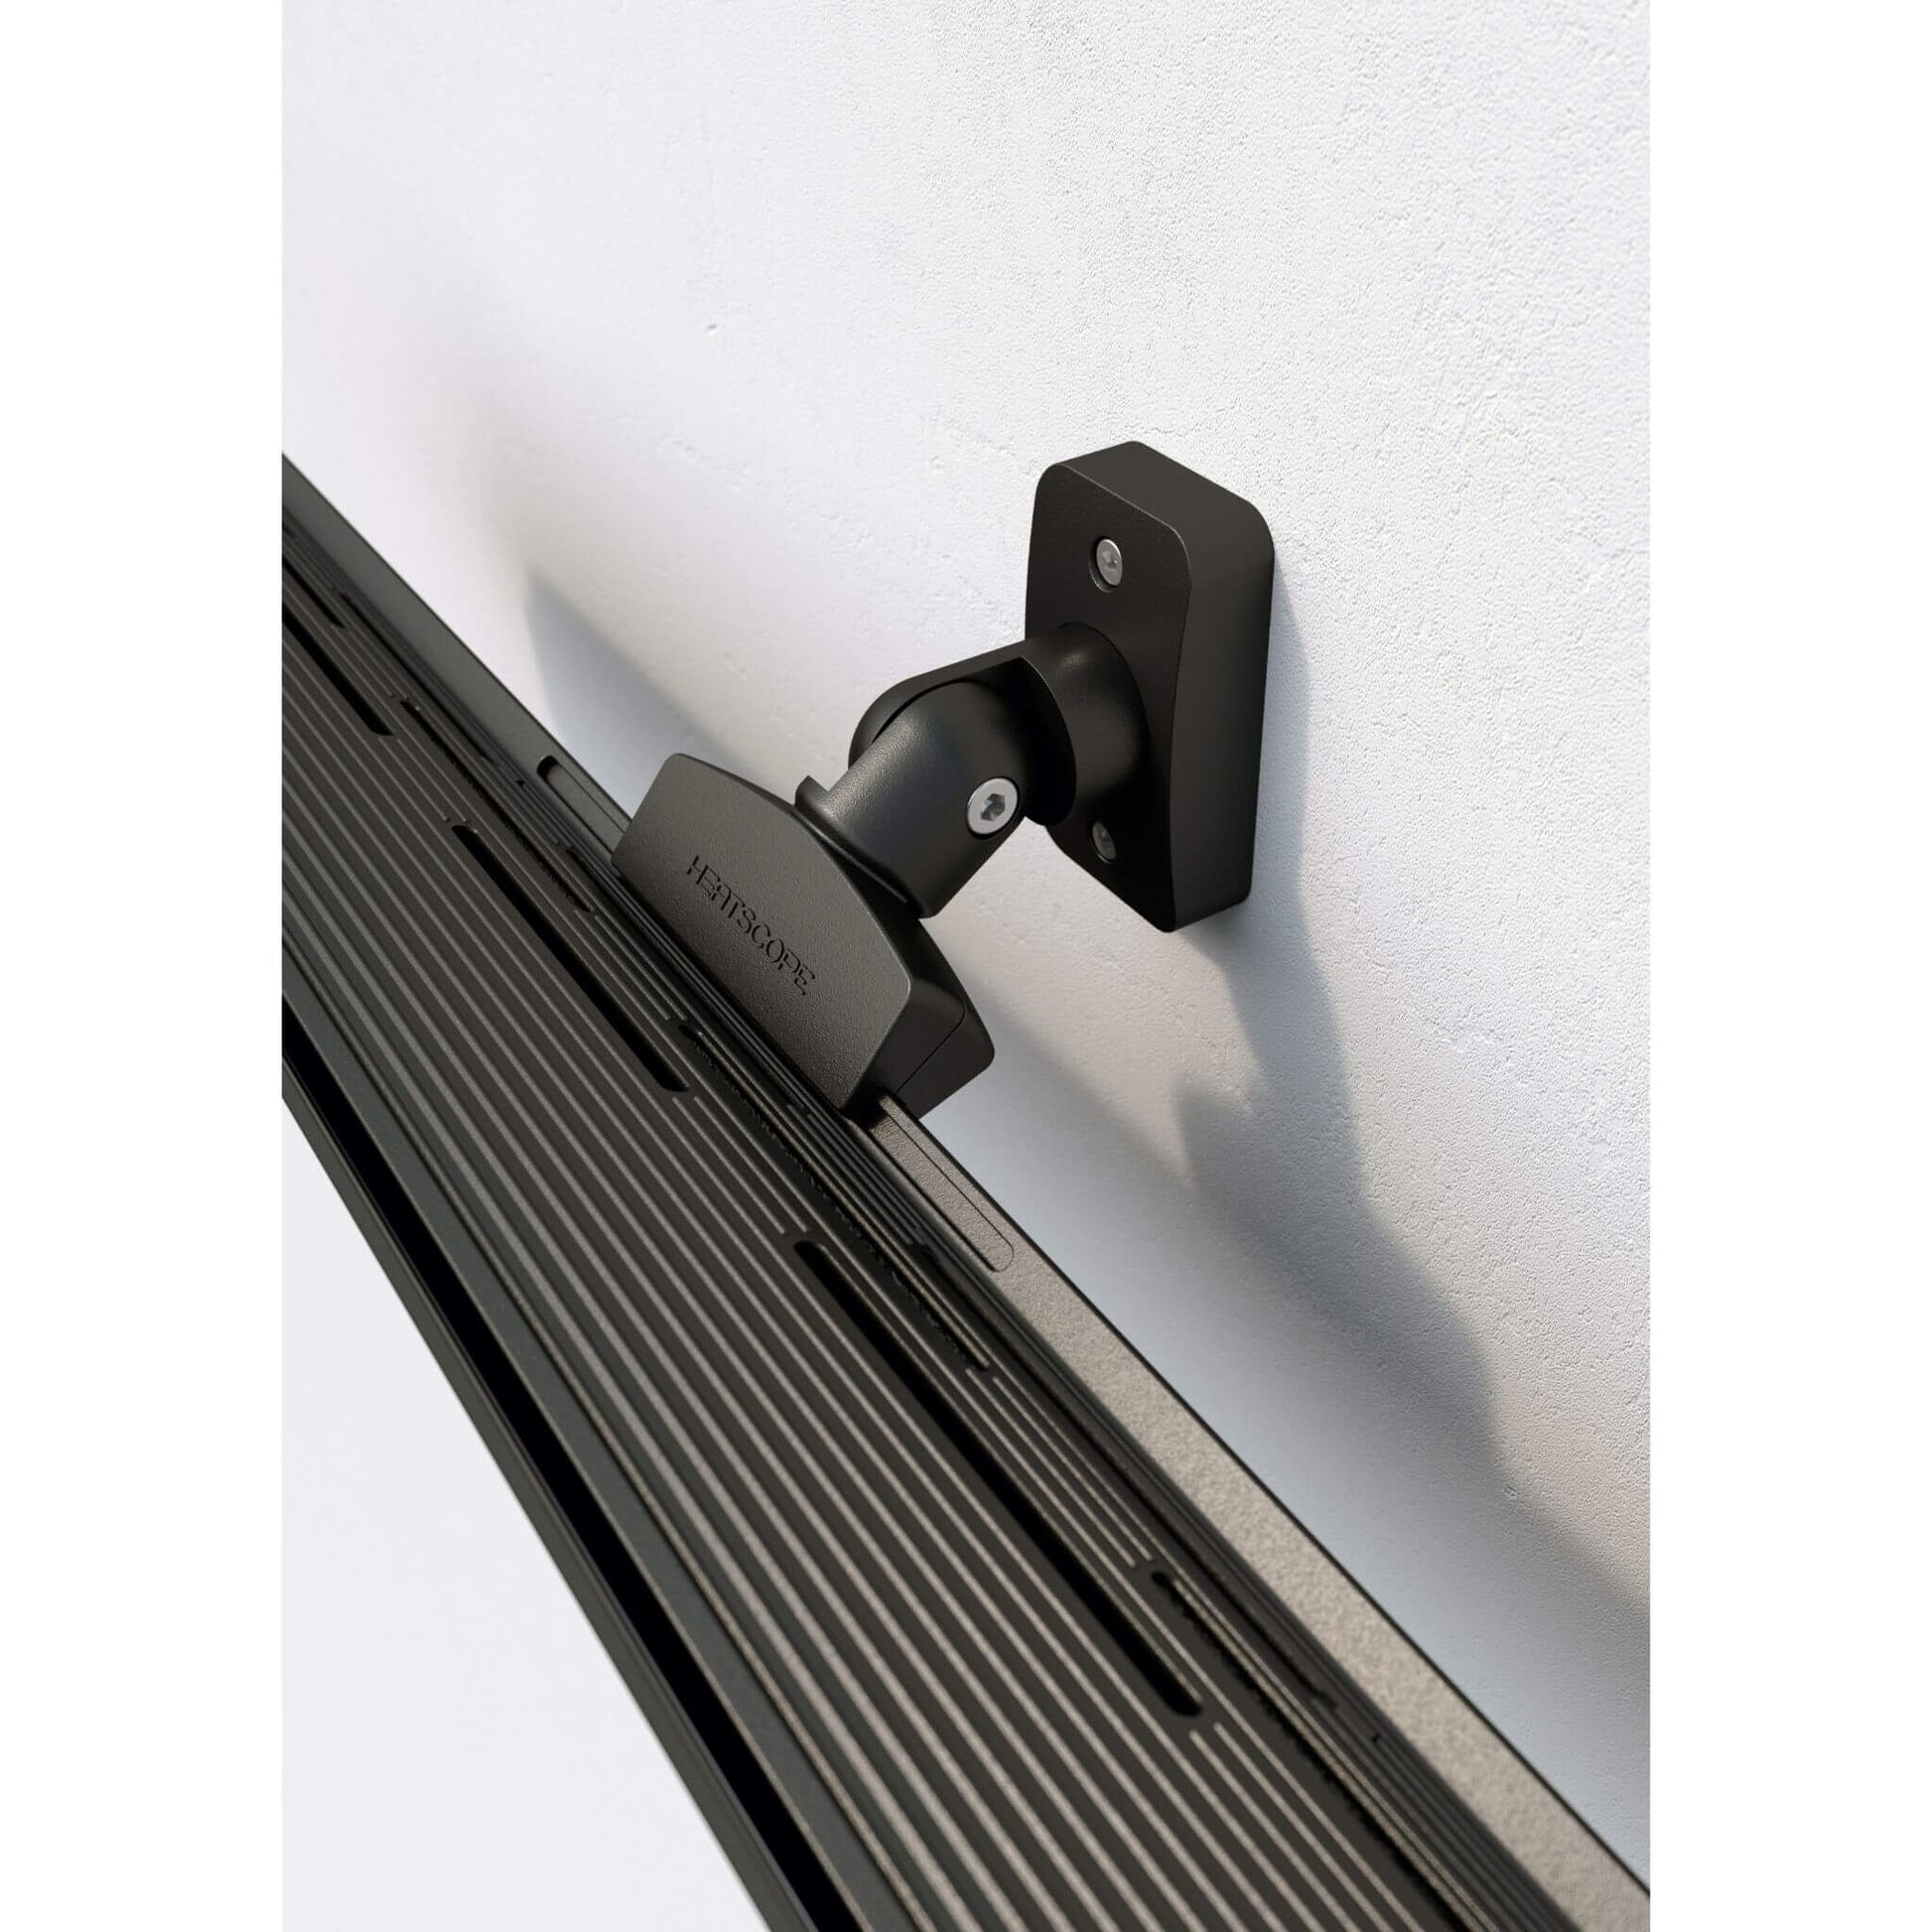 Heatscope Pure radiant heater in black with wall mounted parts